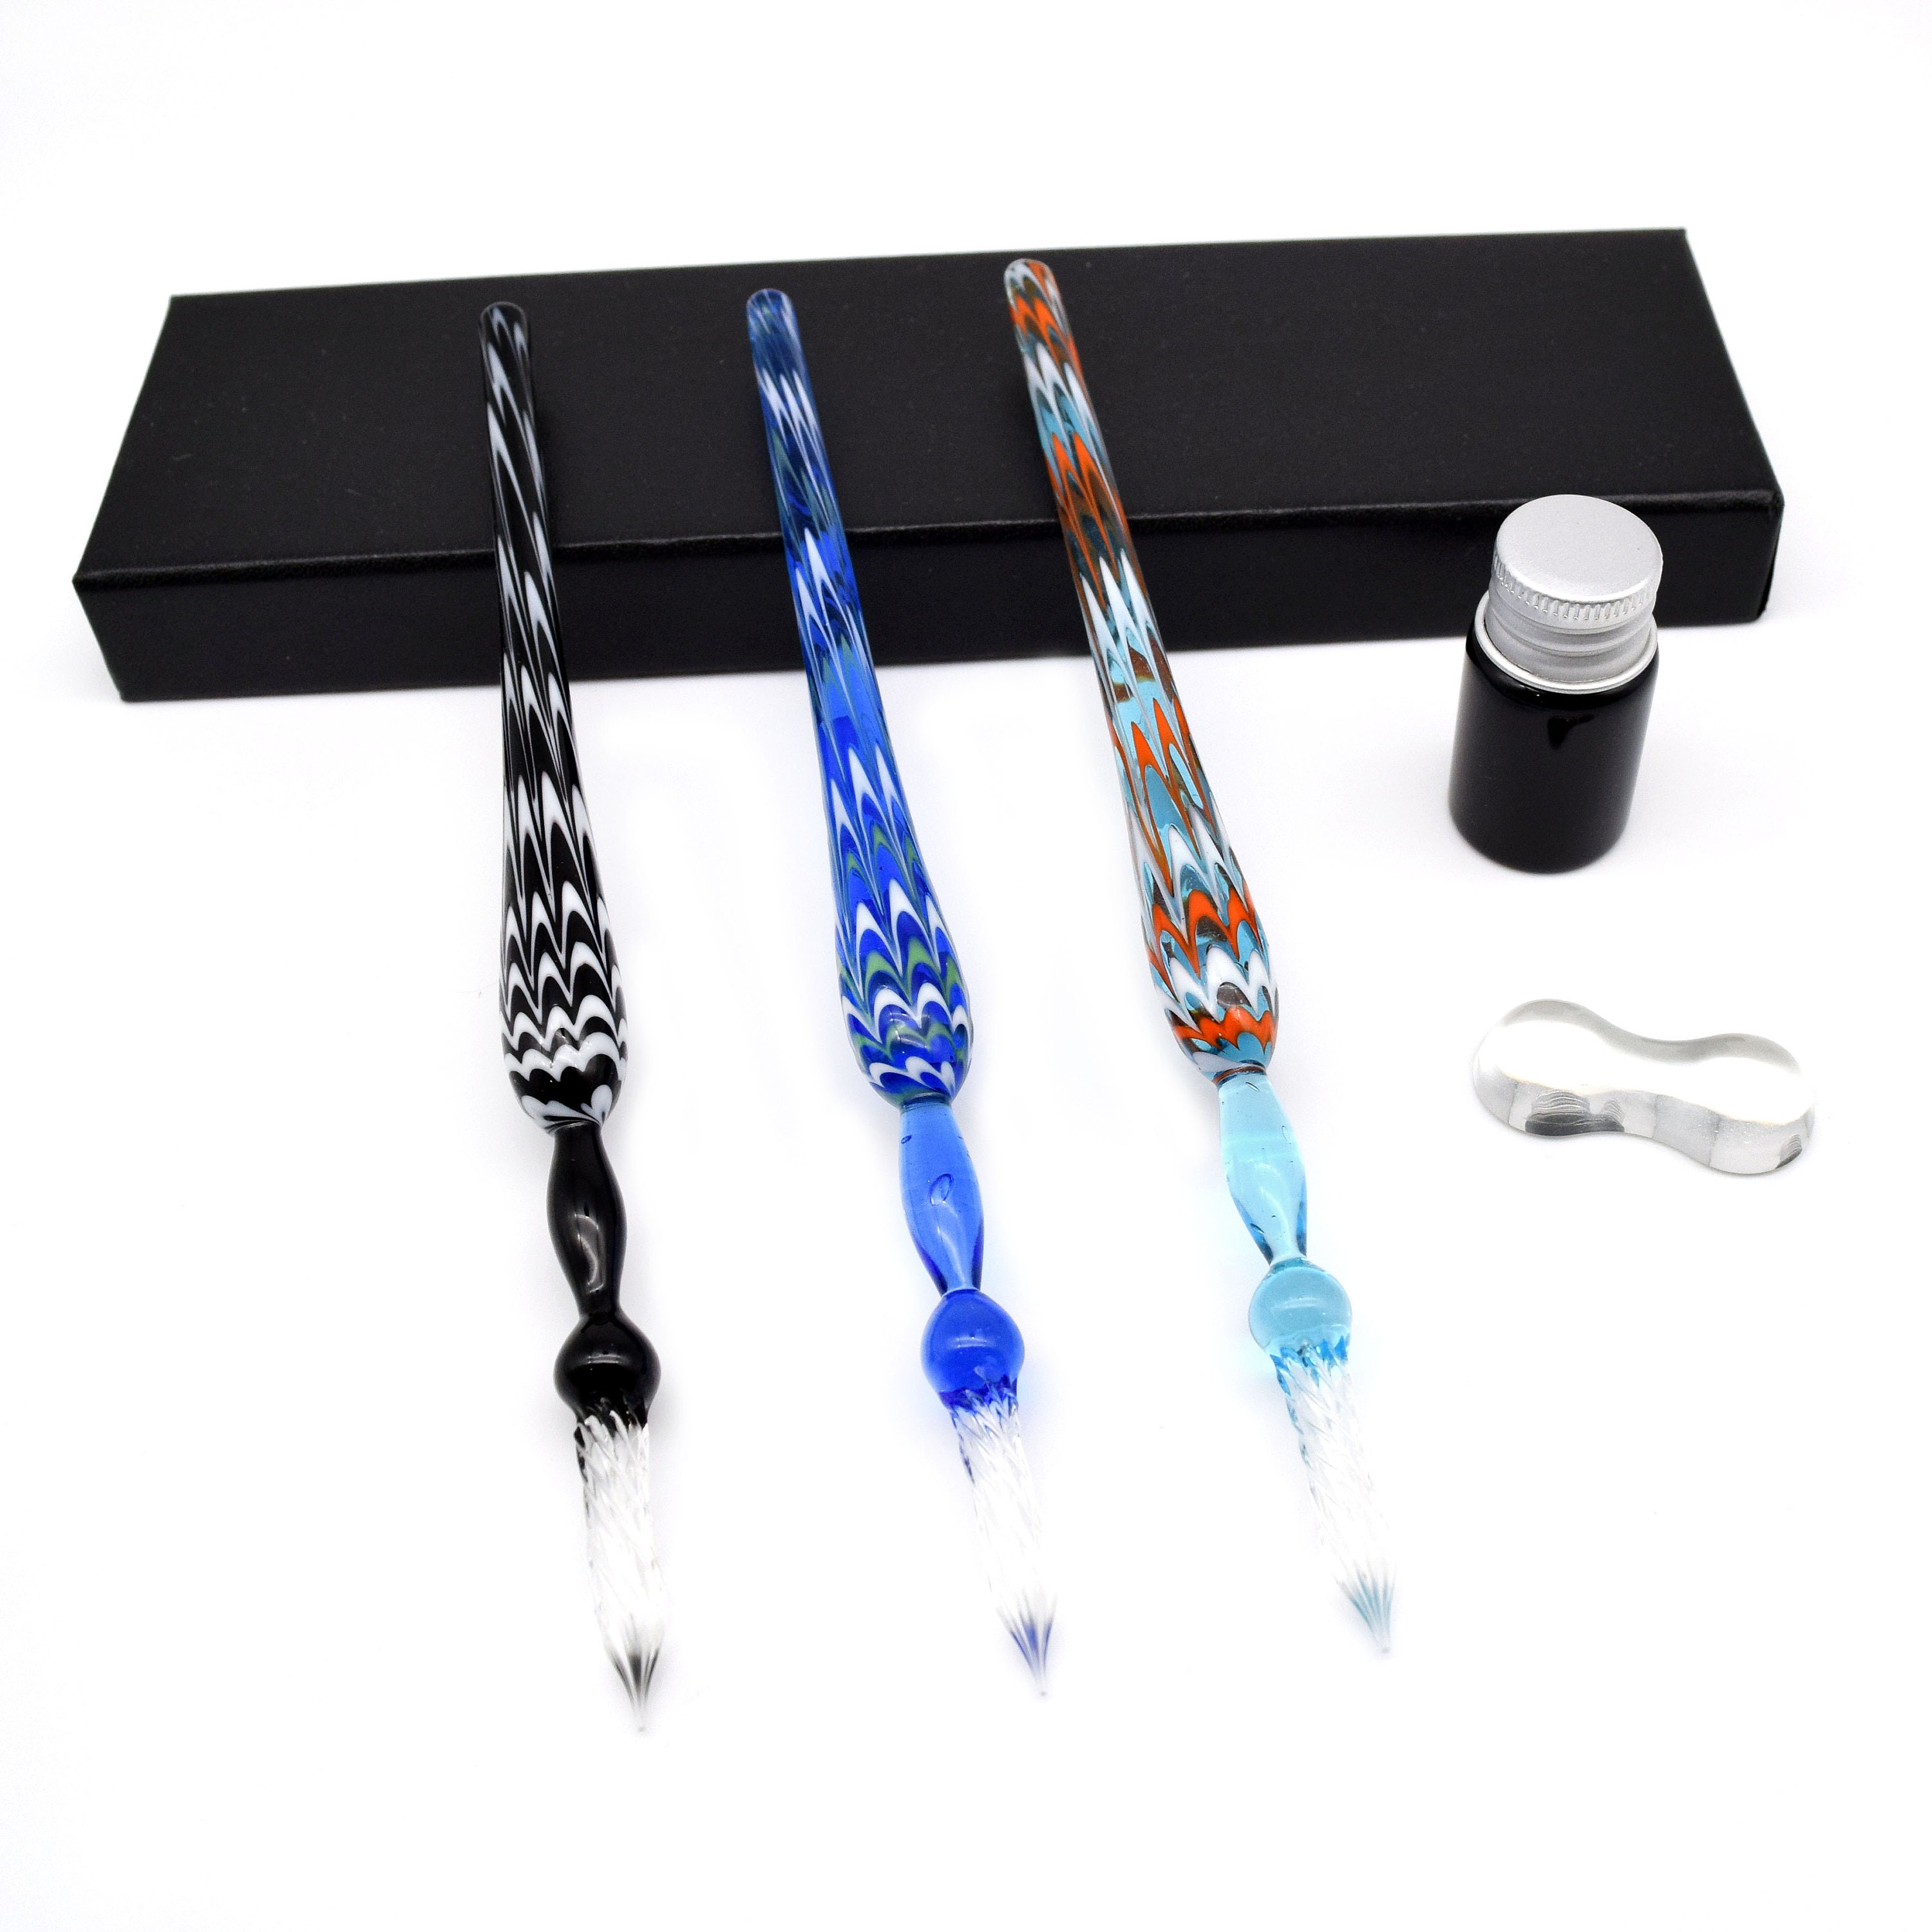 Ugly Glass Dip Pens for Calligraphy and Writing, Surprise Gift Set,  Mysterious Pen Pick by the Shop 